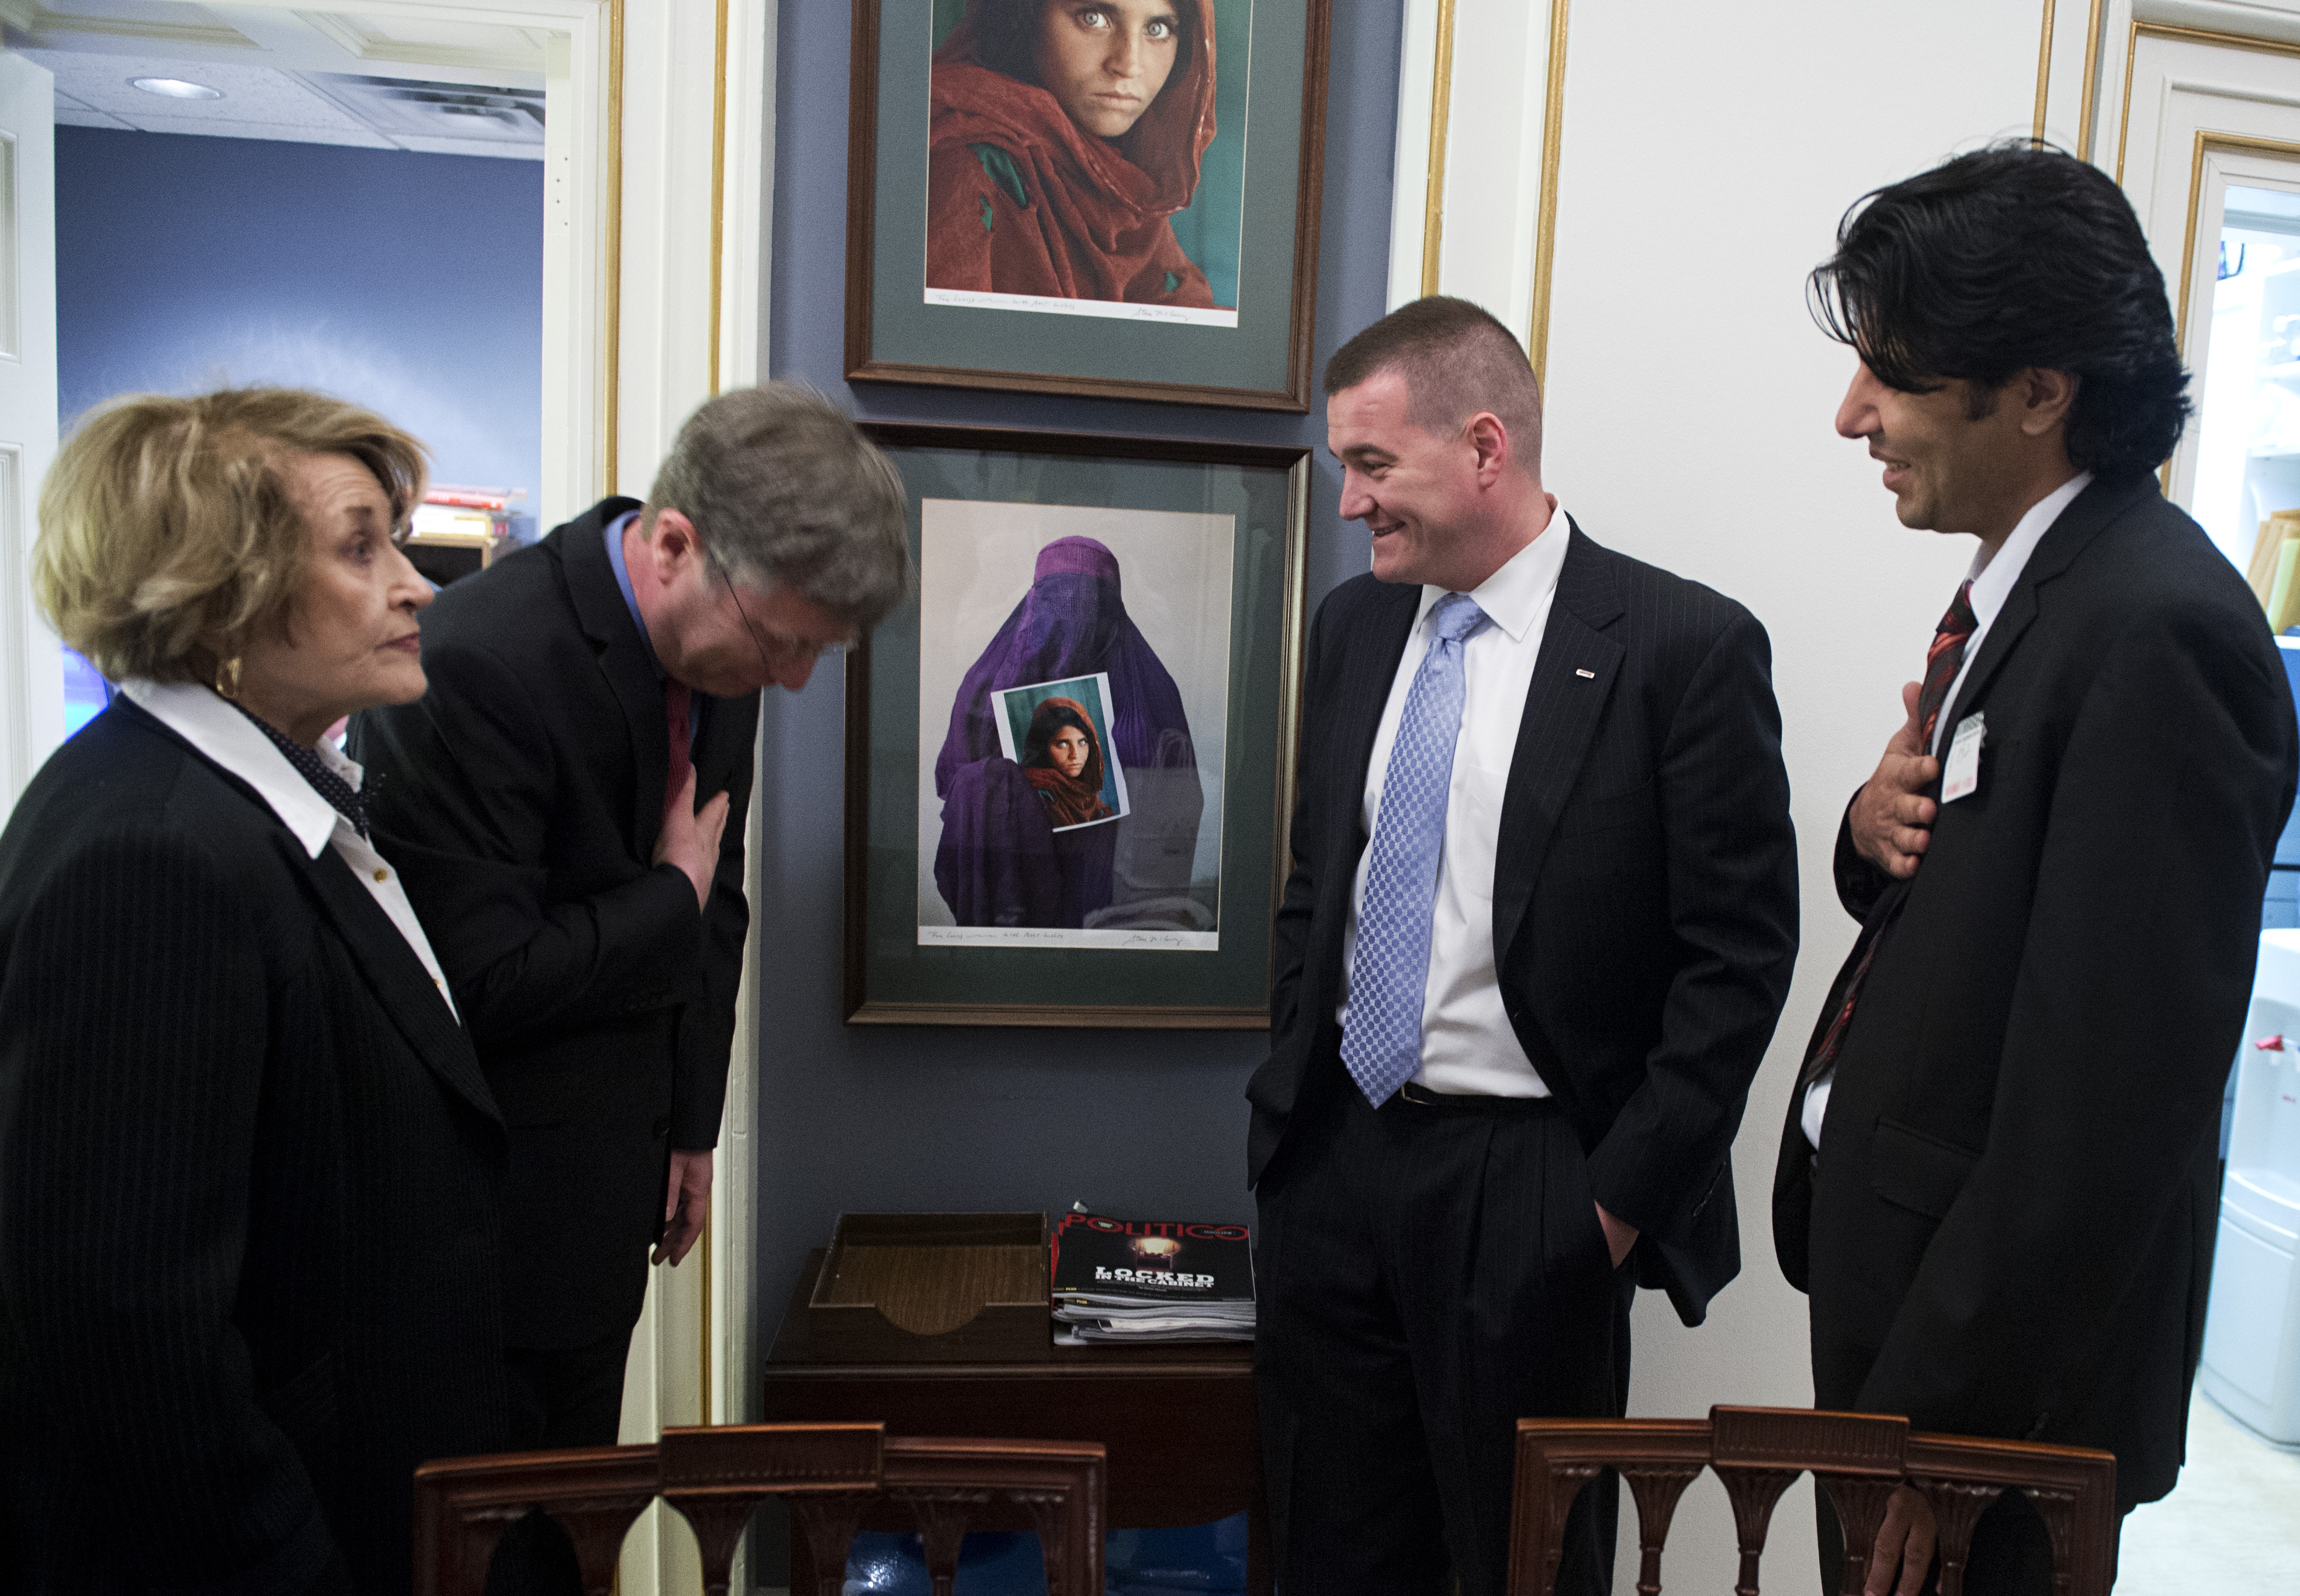 State Department Under Secretary Patrick Kennedy greets Shinwari in 2013, in the Capitol as Captain Zeller and Louise Slaughter, D-N.Y., look on. (Tom Williams/CQ Roll Call/Getty)